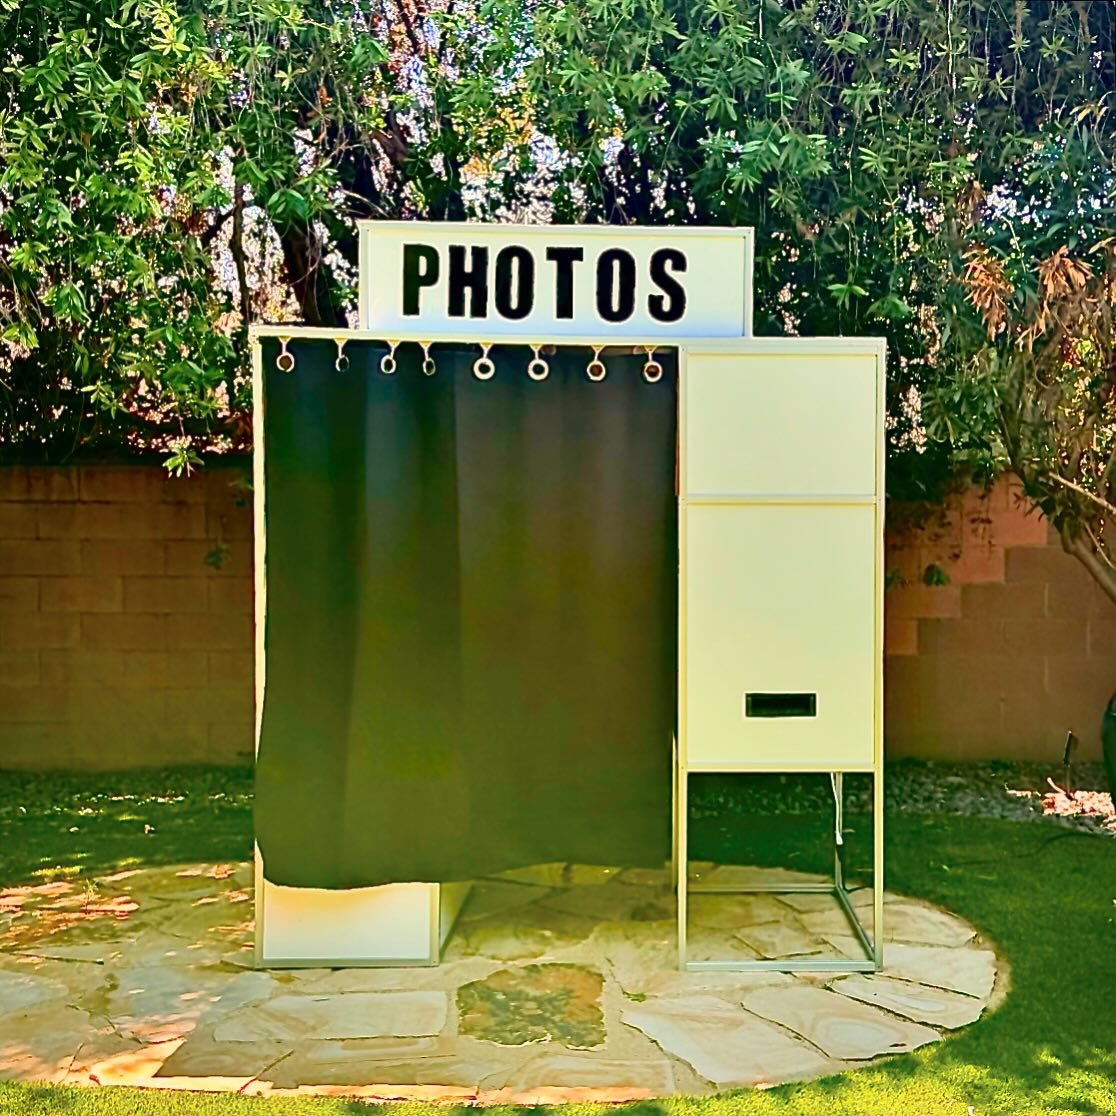 Our enclosed booths are perfect for any environment. Sunny, cloudy, day, night, it doesn&rsquo;t matter. You always get a perfect shot inside. 
.
.
.
.
.
#lbphotobooth #photobooth #photos #weddings #love #events #props #lbc #longbeach #parties #fun #